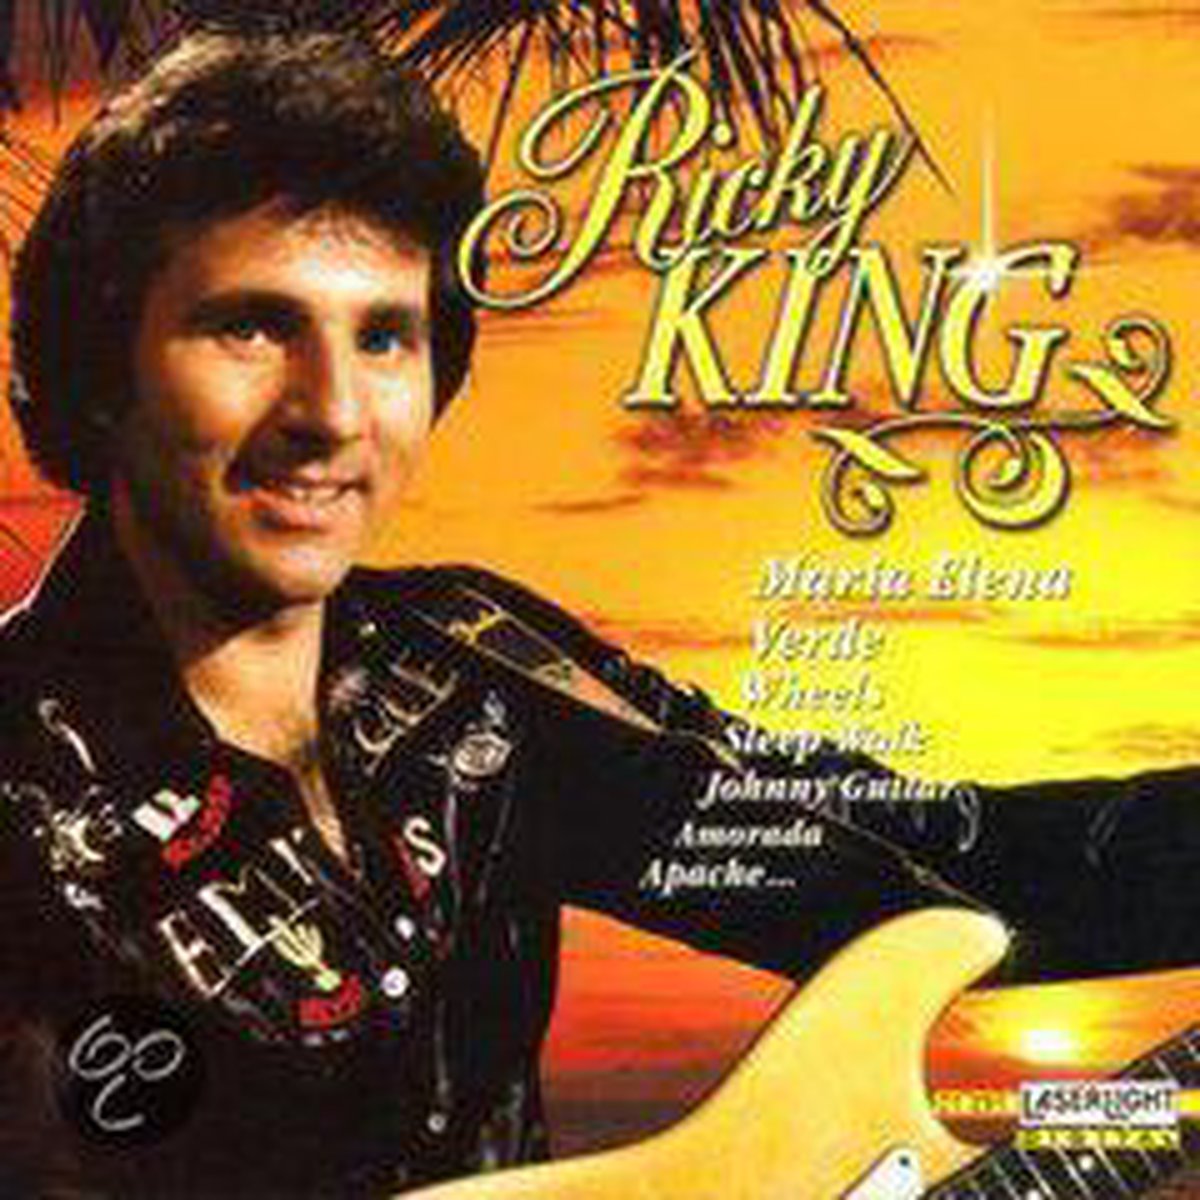 ricky king ching